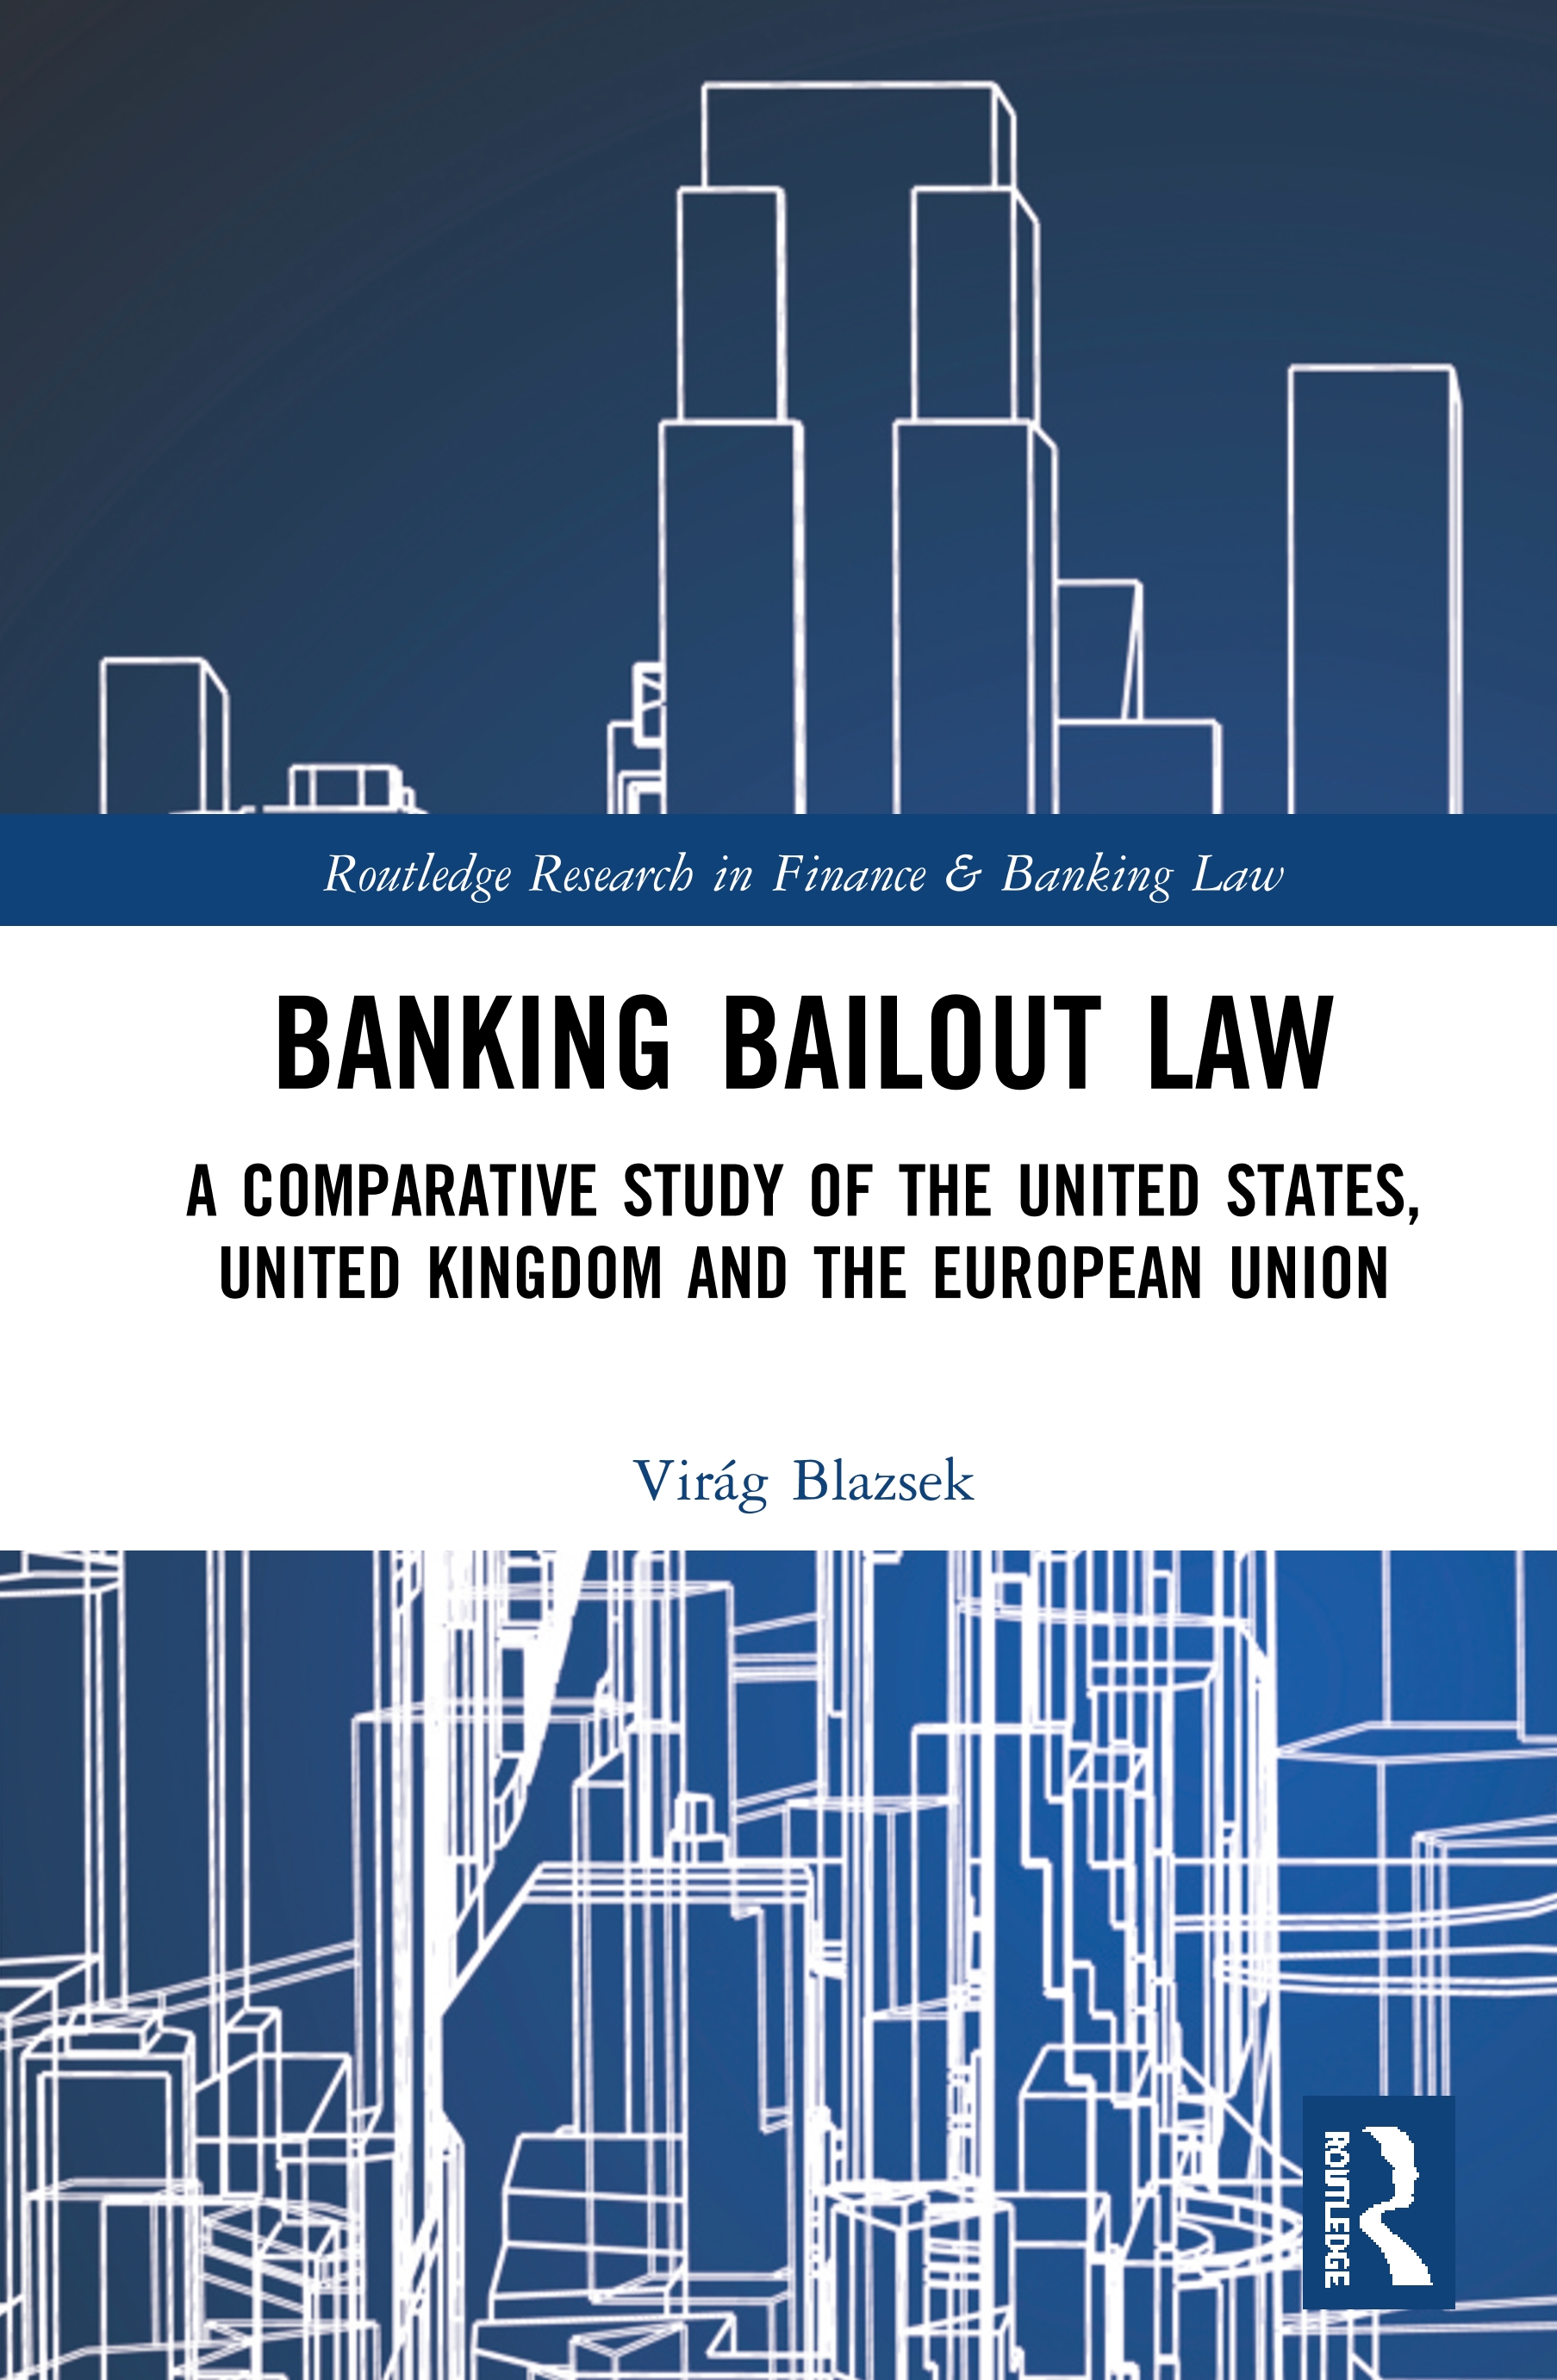 Virág Blazsek Banking Bailout Law: A Comparative Study of the United States, United Kingdom and the European Union